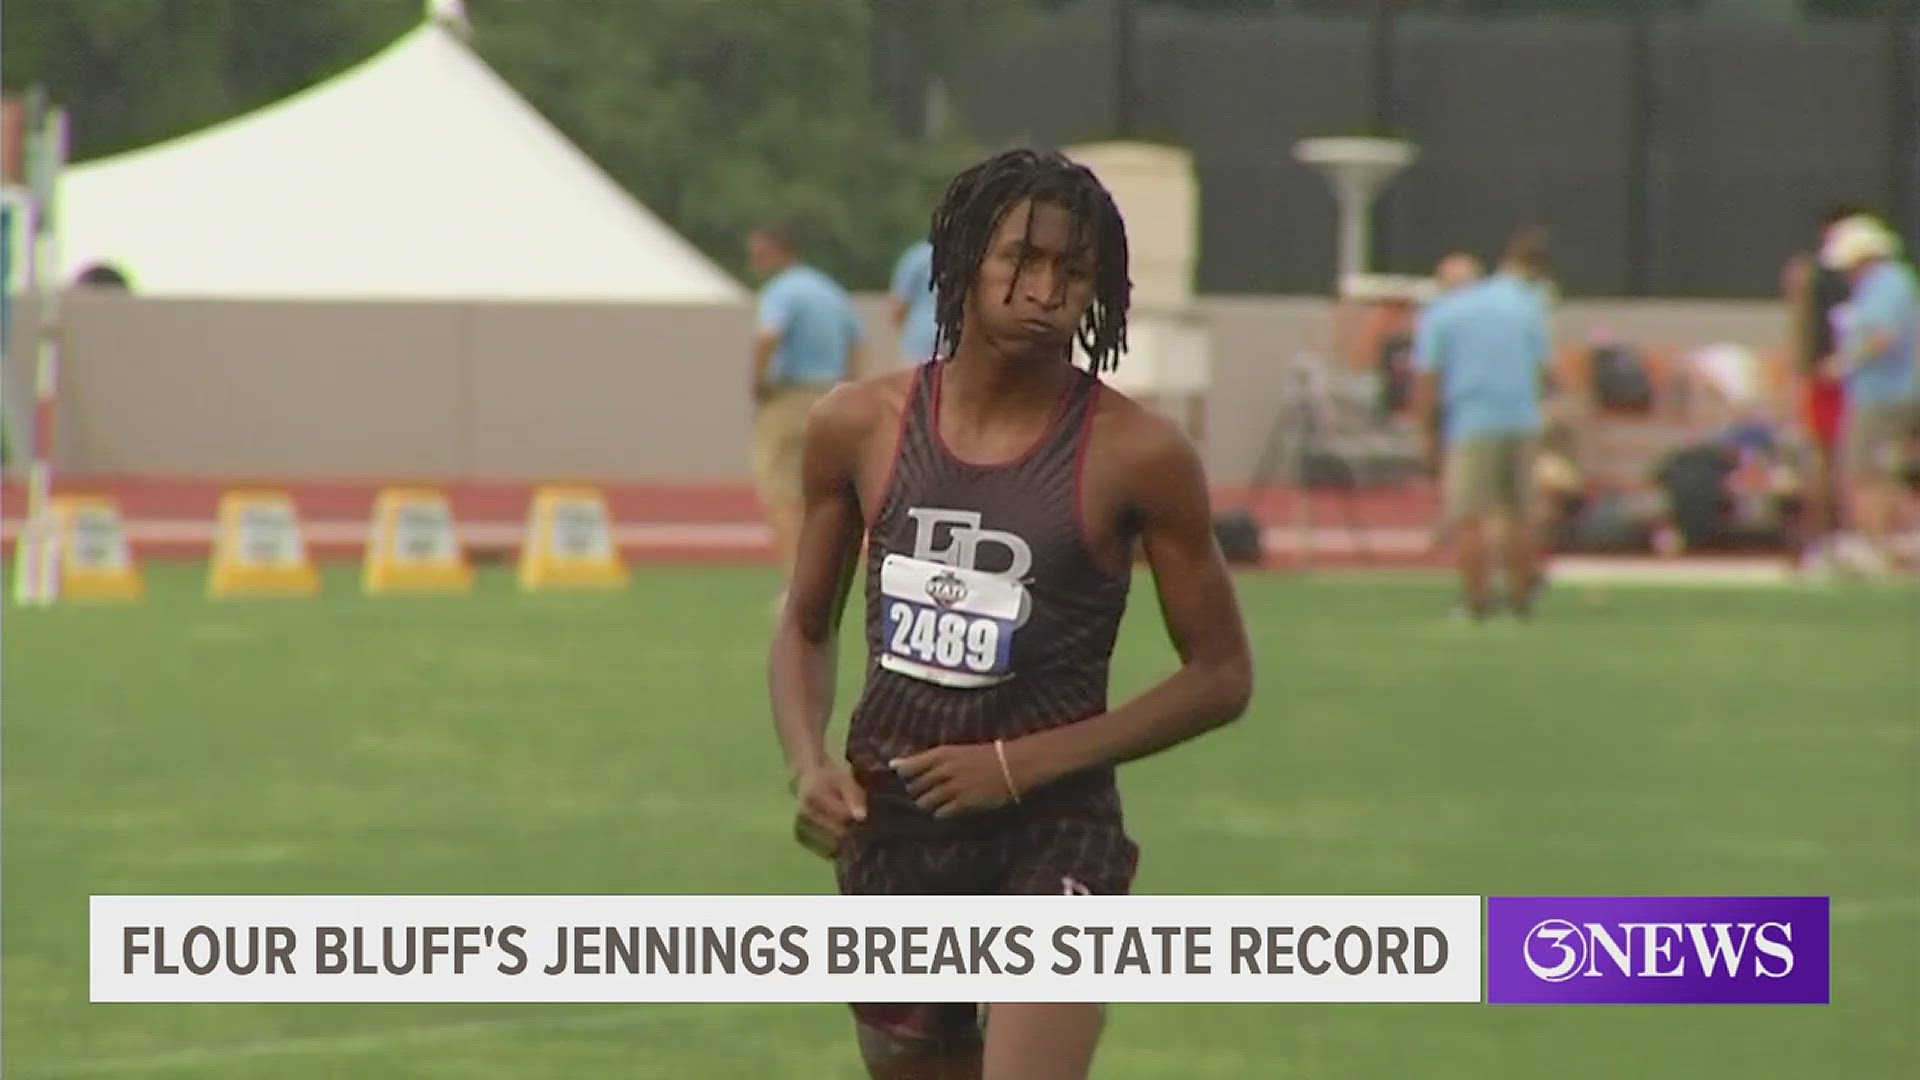 Jennings broke the 40-year-old record with a jump of 7' 1.75"